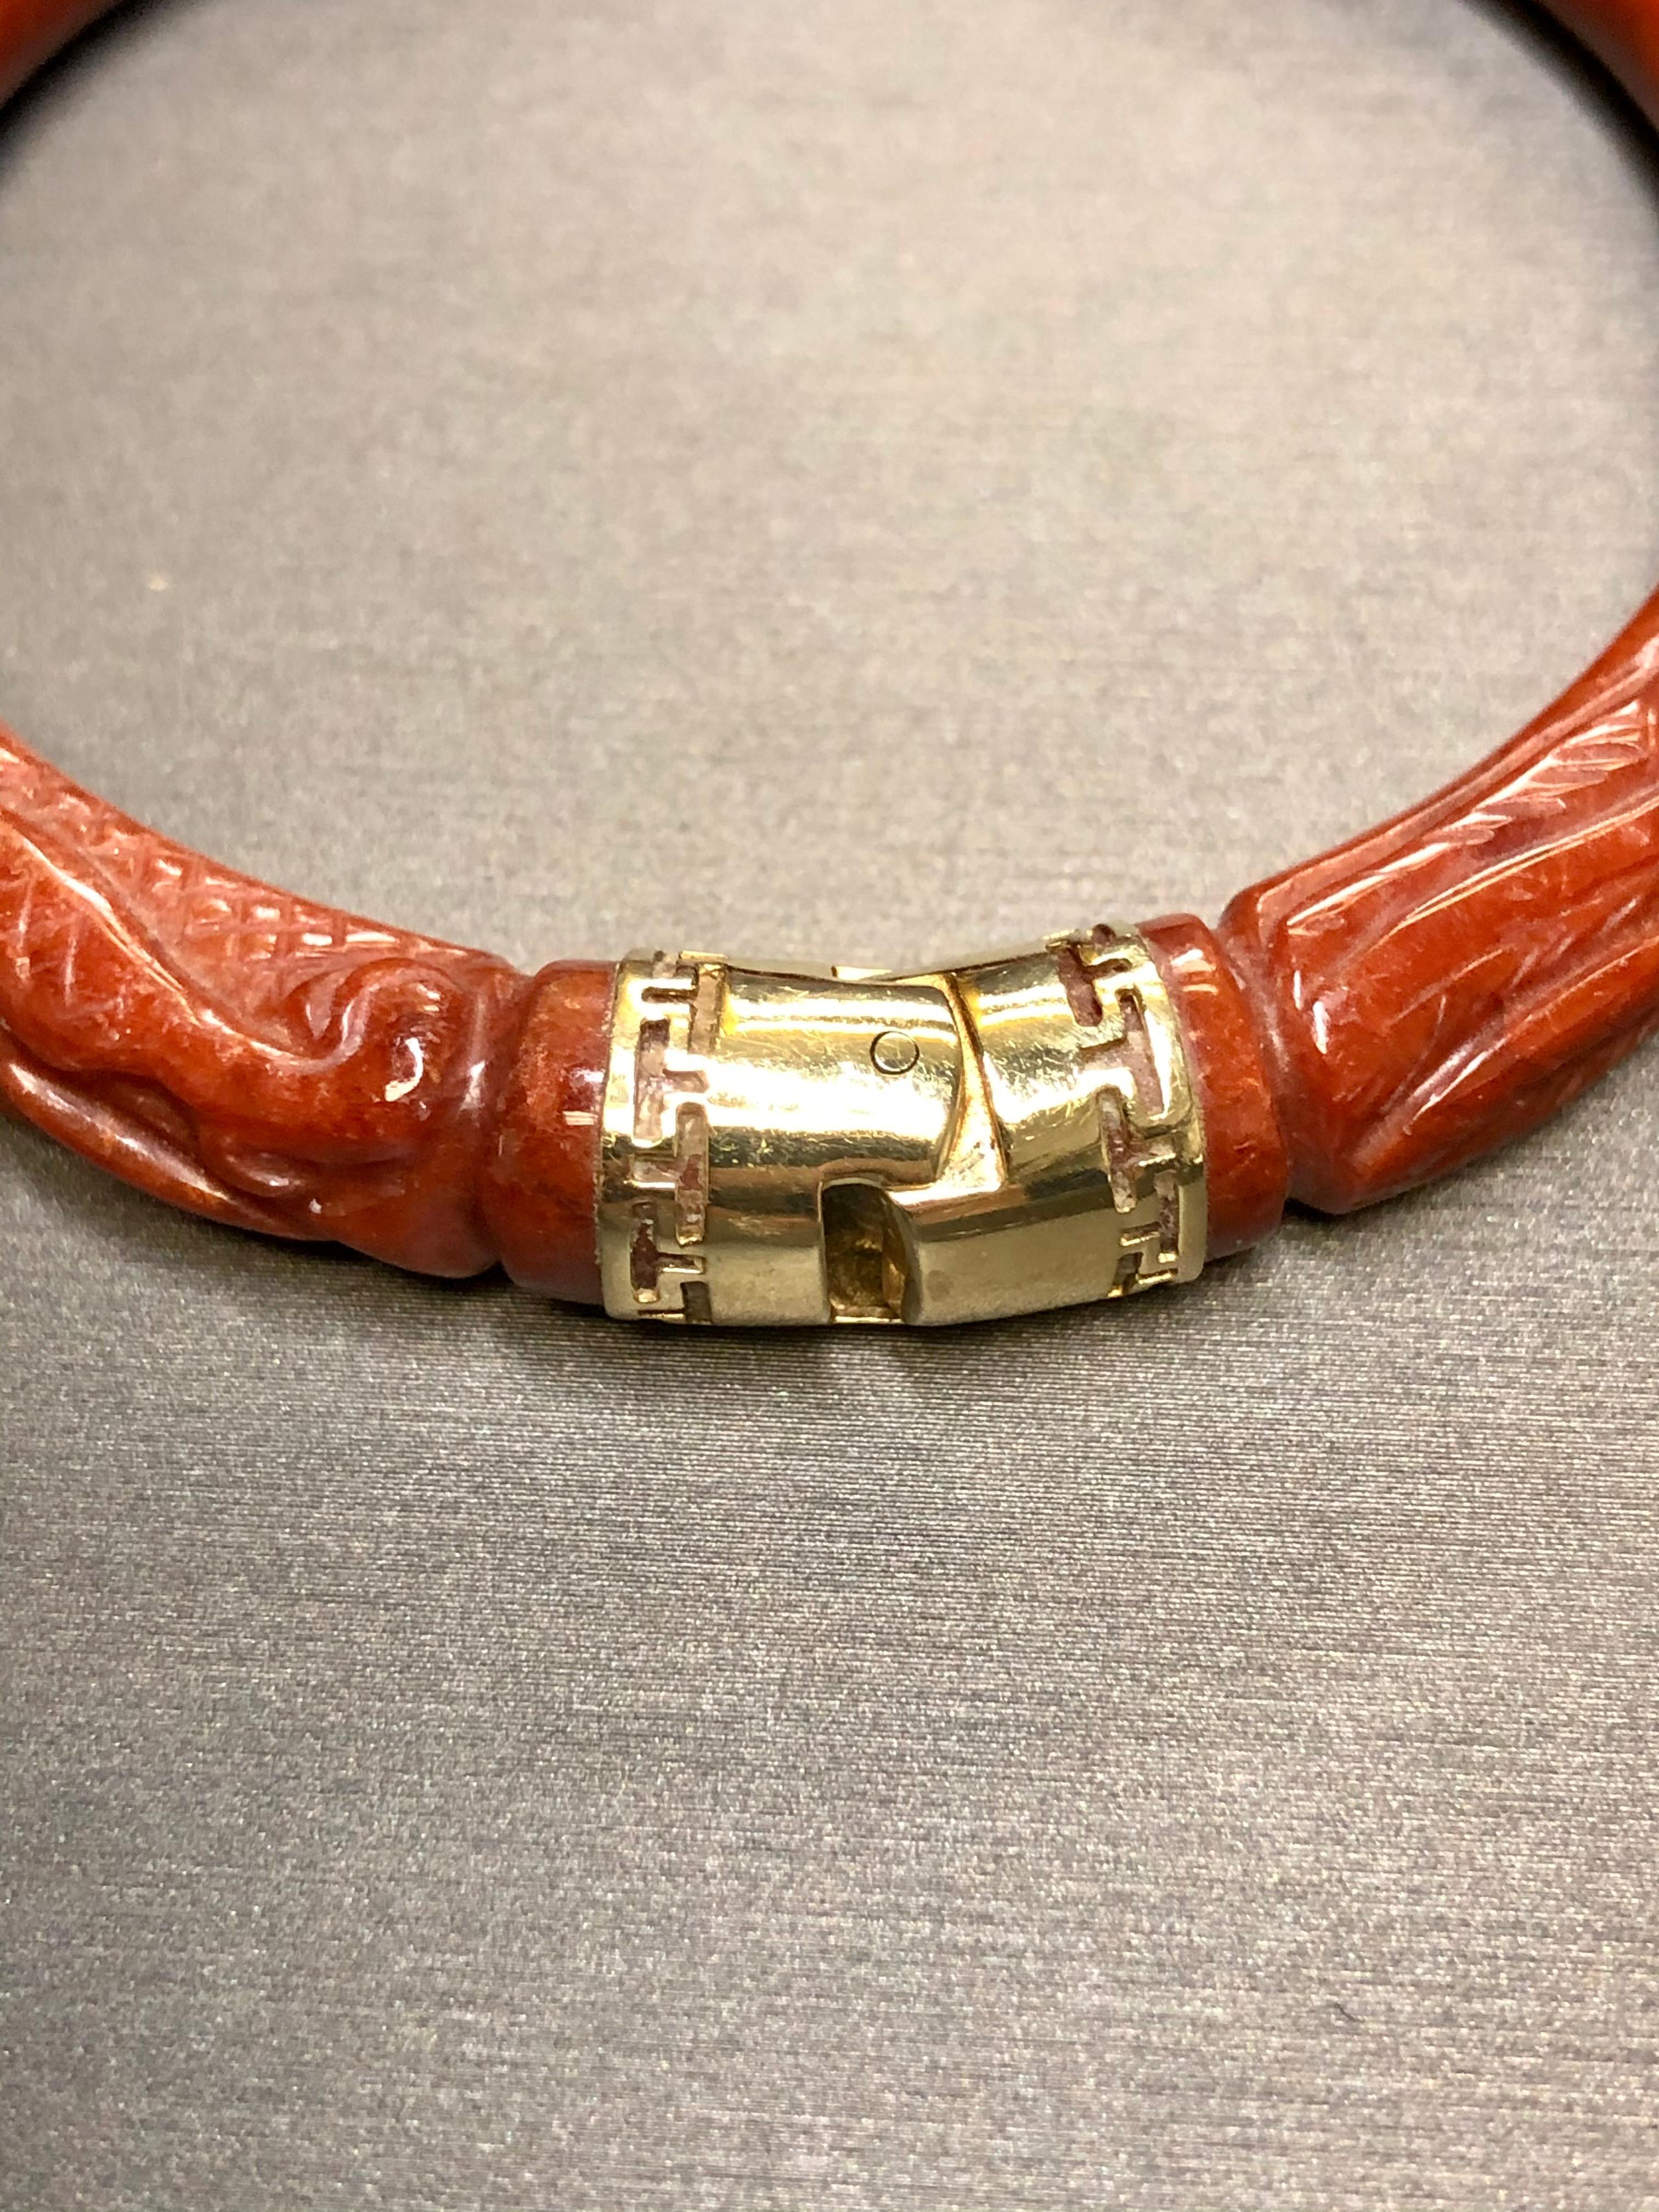 A beautiful and striking bangle bracelet  done in 100% natural red jade carved into a stylized dragon with its hinged portion in 14K.  

Dimensions/Weight:
Bracelet has an interior length of 7.25” and measures 9mm or .28” wide. Weighs 43.2g.